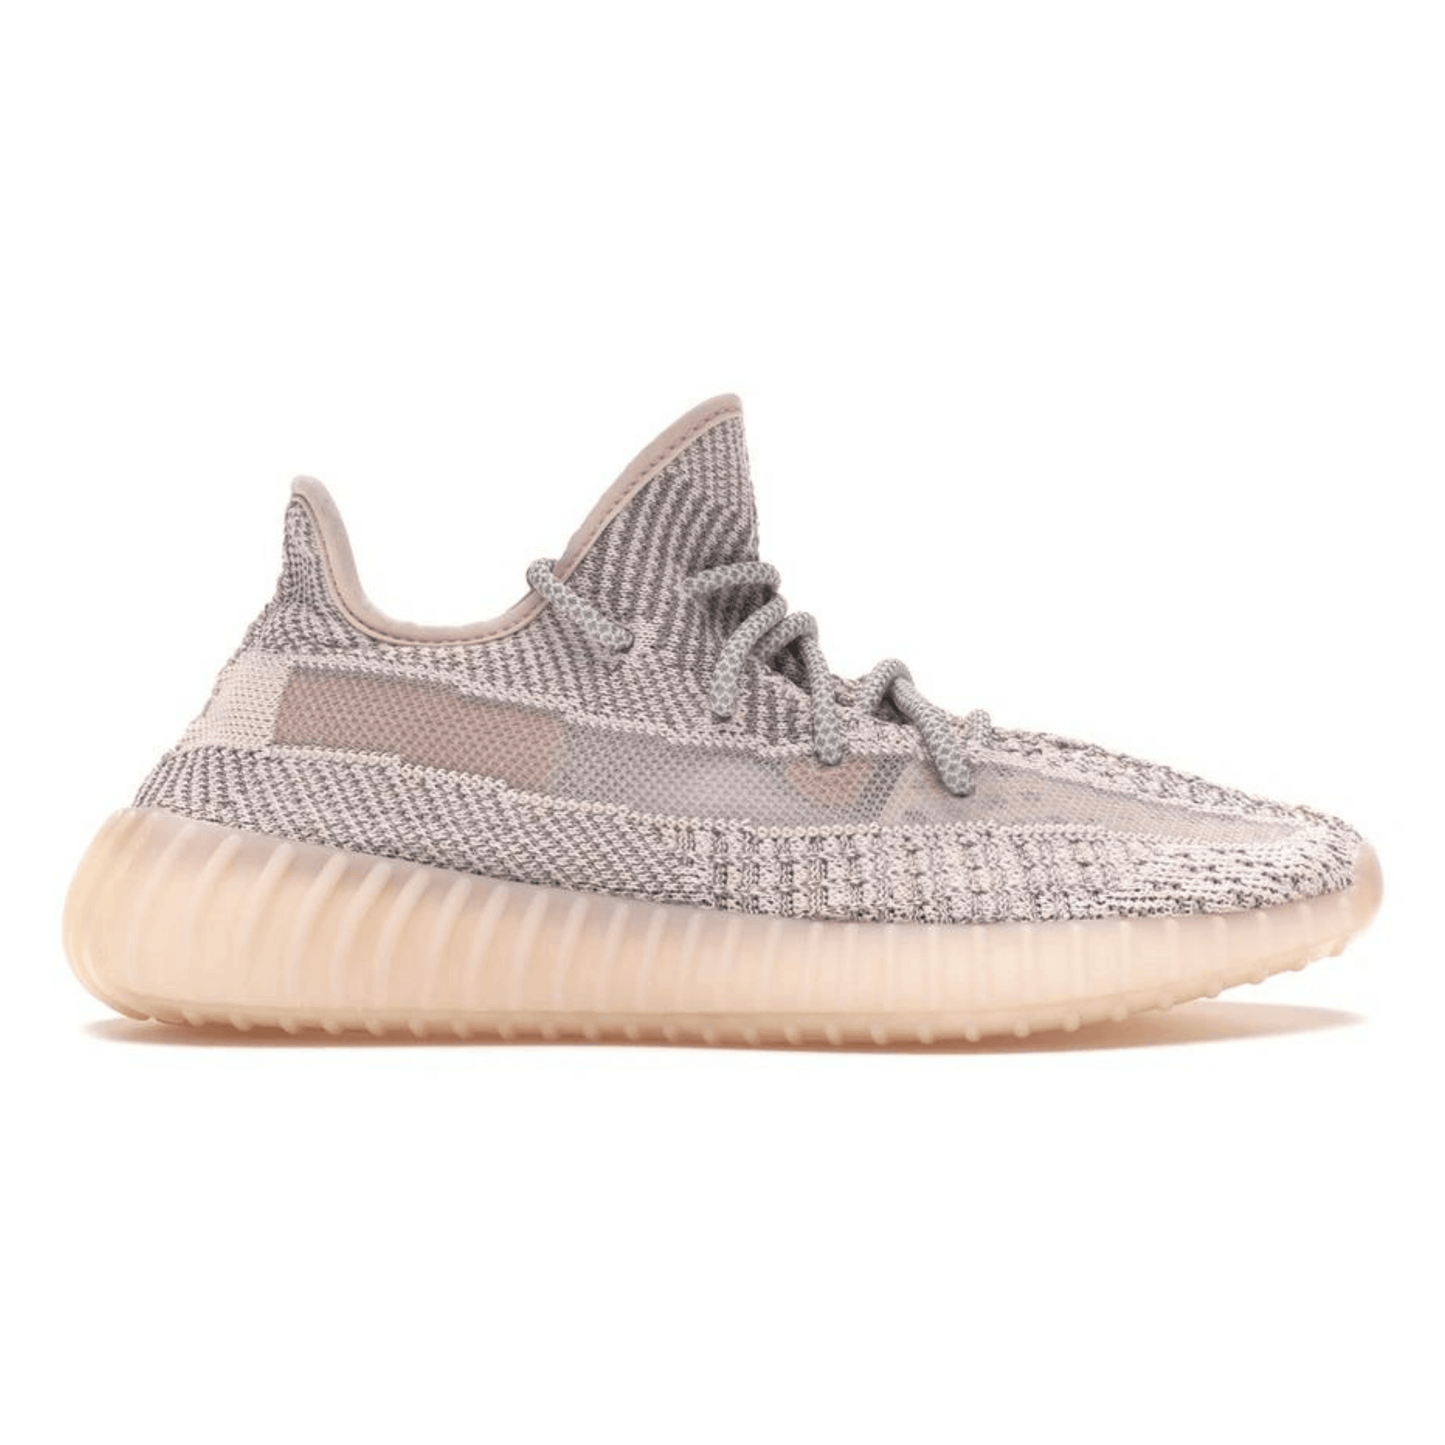 Yeezy Boost 350 V2 'Synth' (Reflective) - FRESNEAKERS